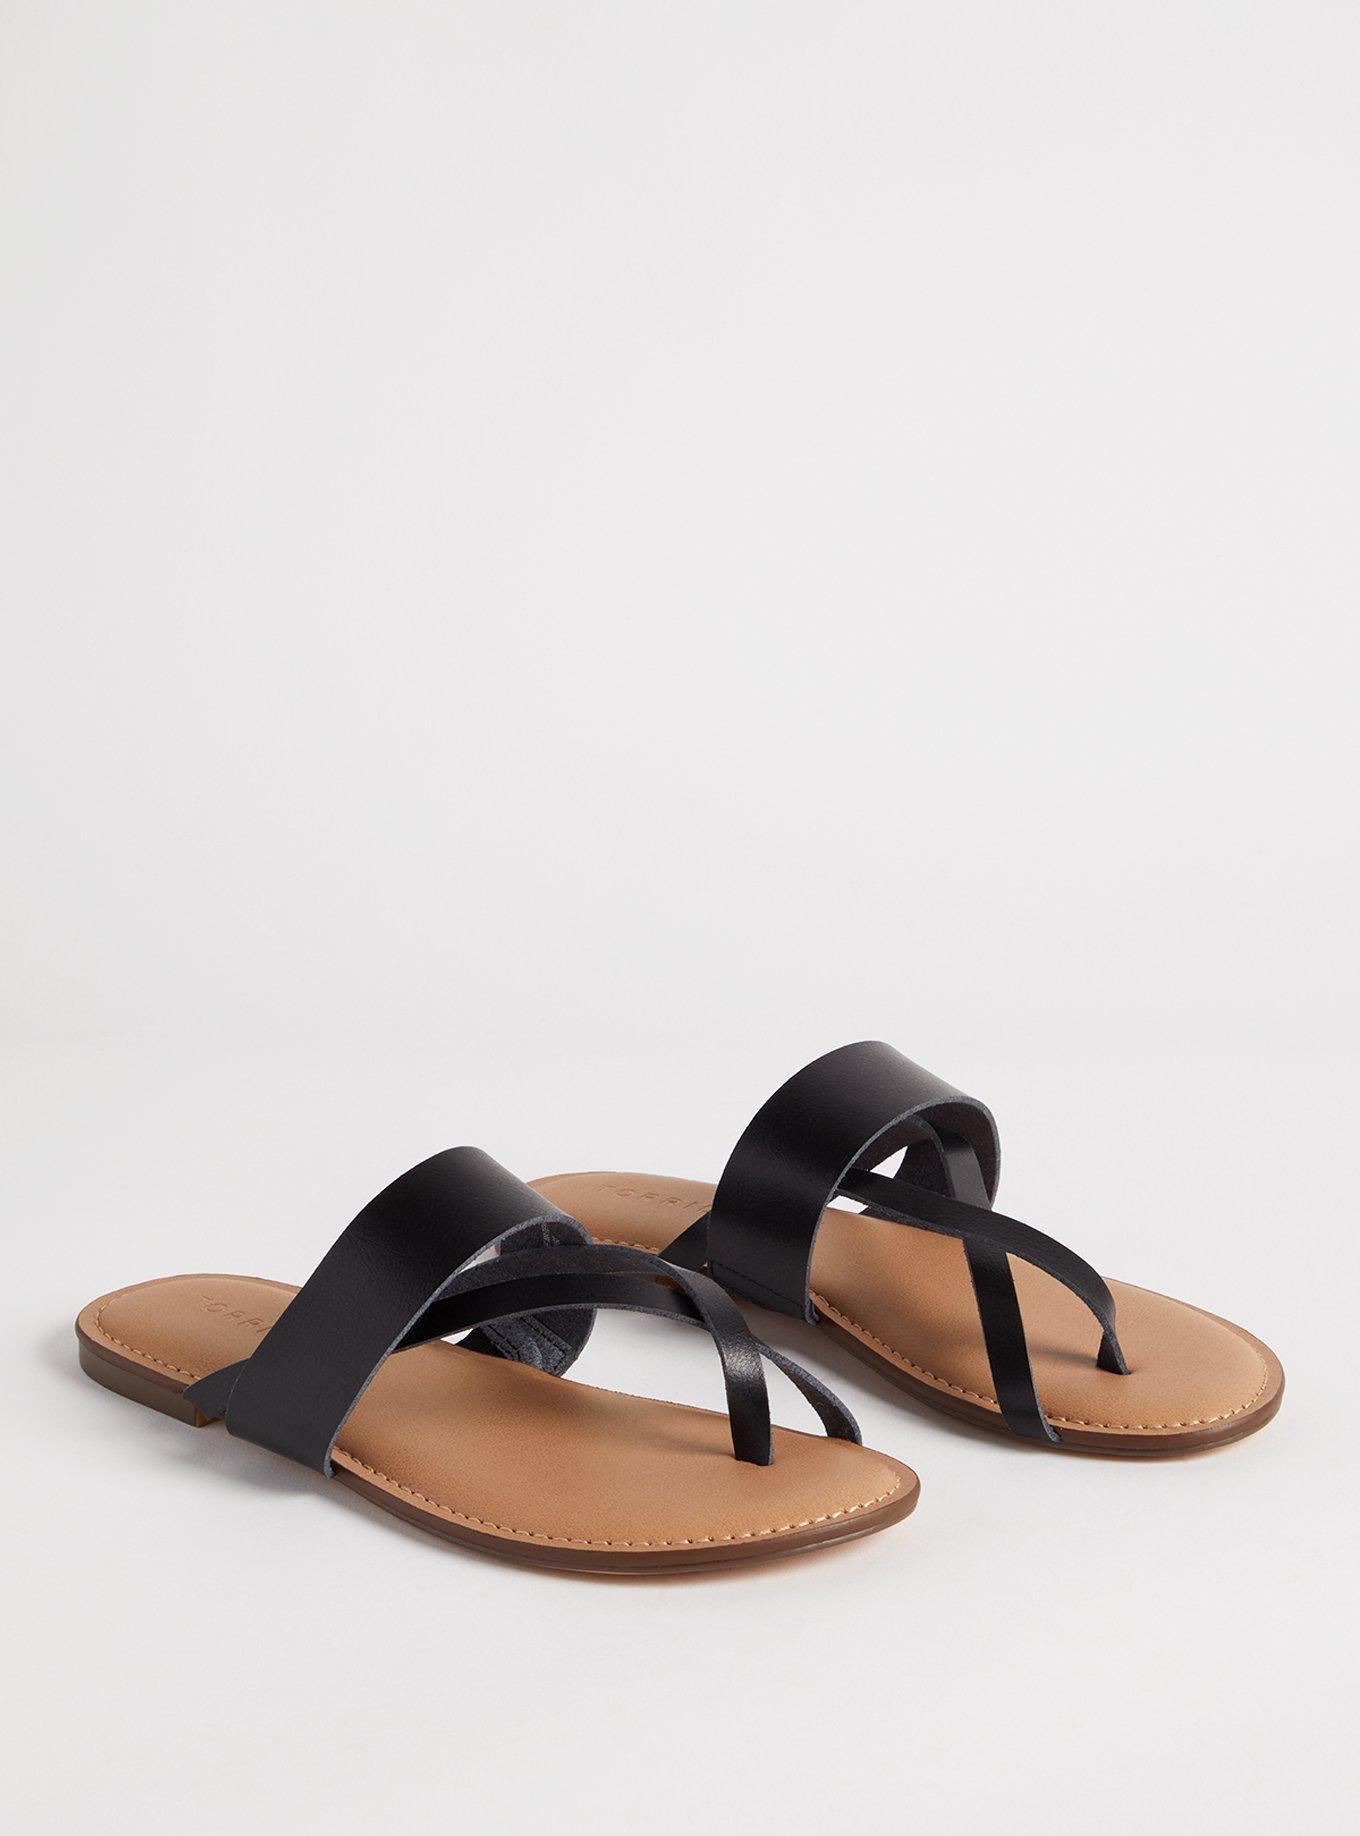 Buy Extra Extra Wide Sandals for Women Online In India -  India